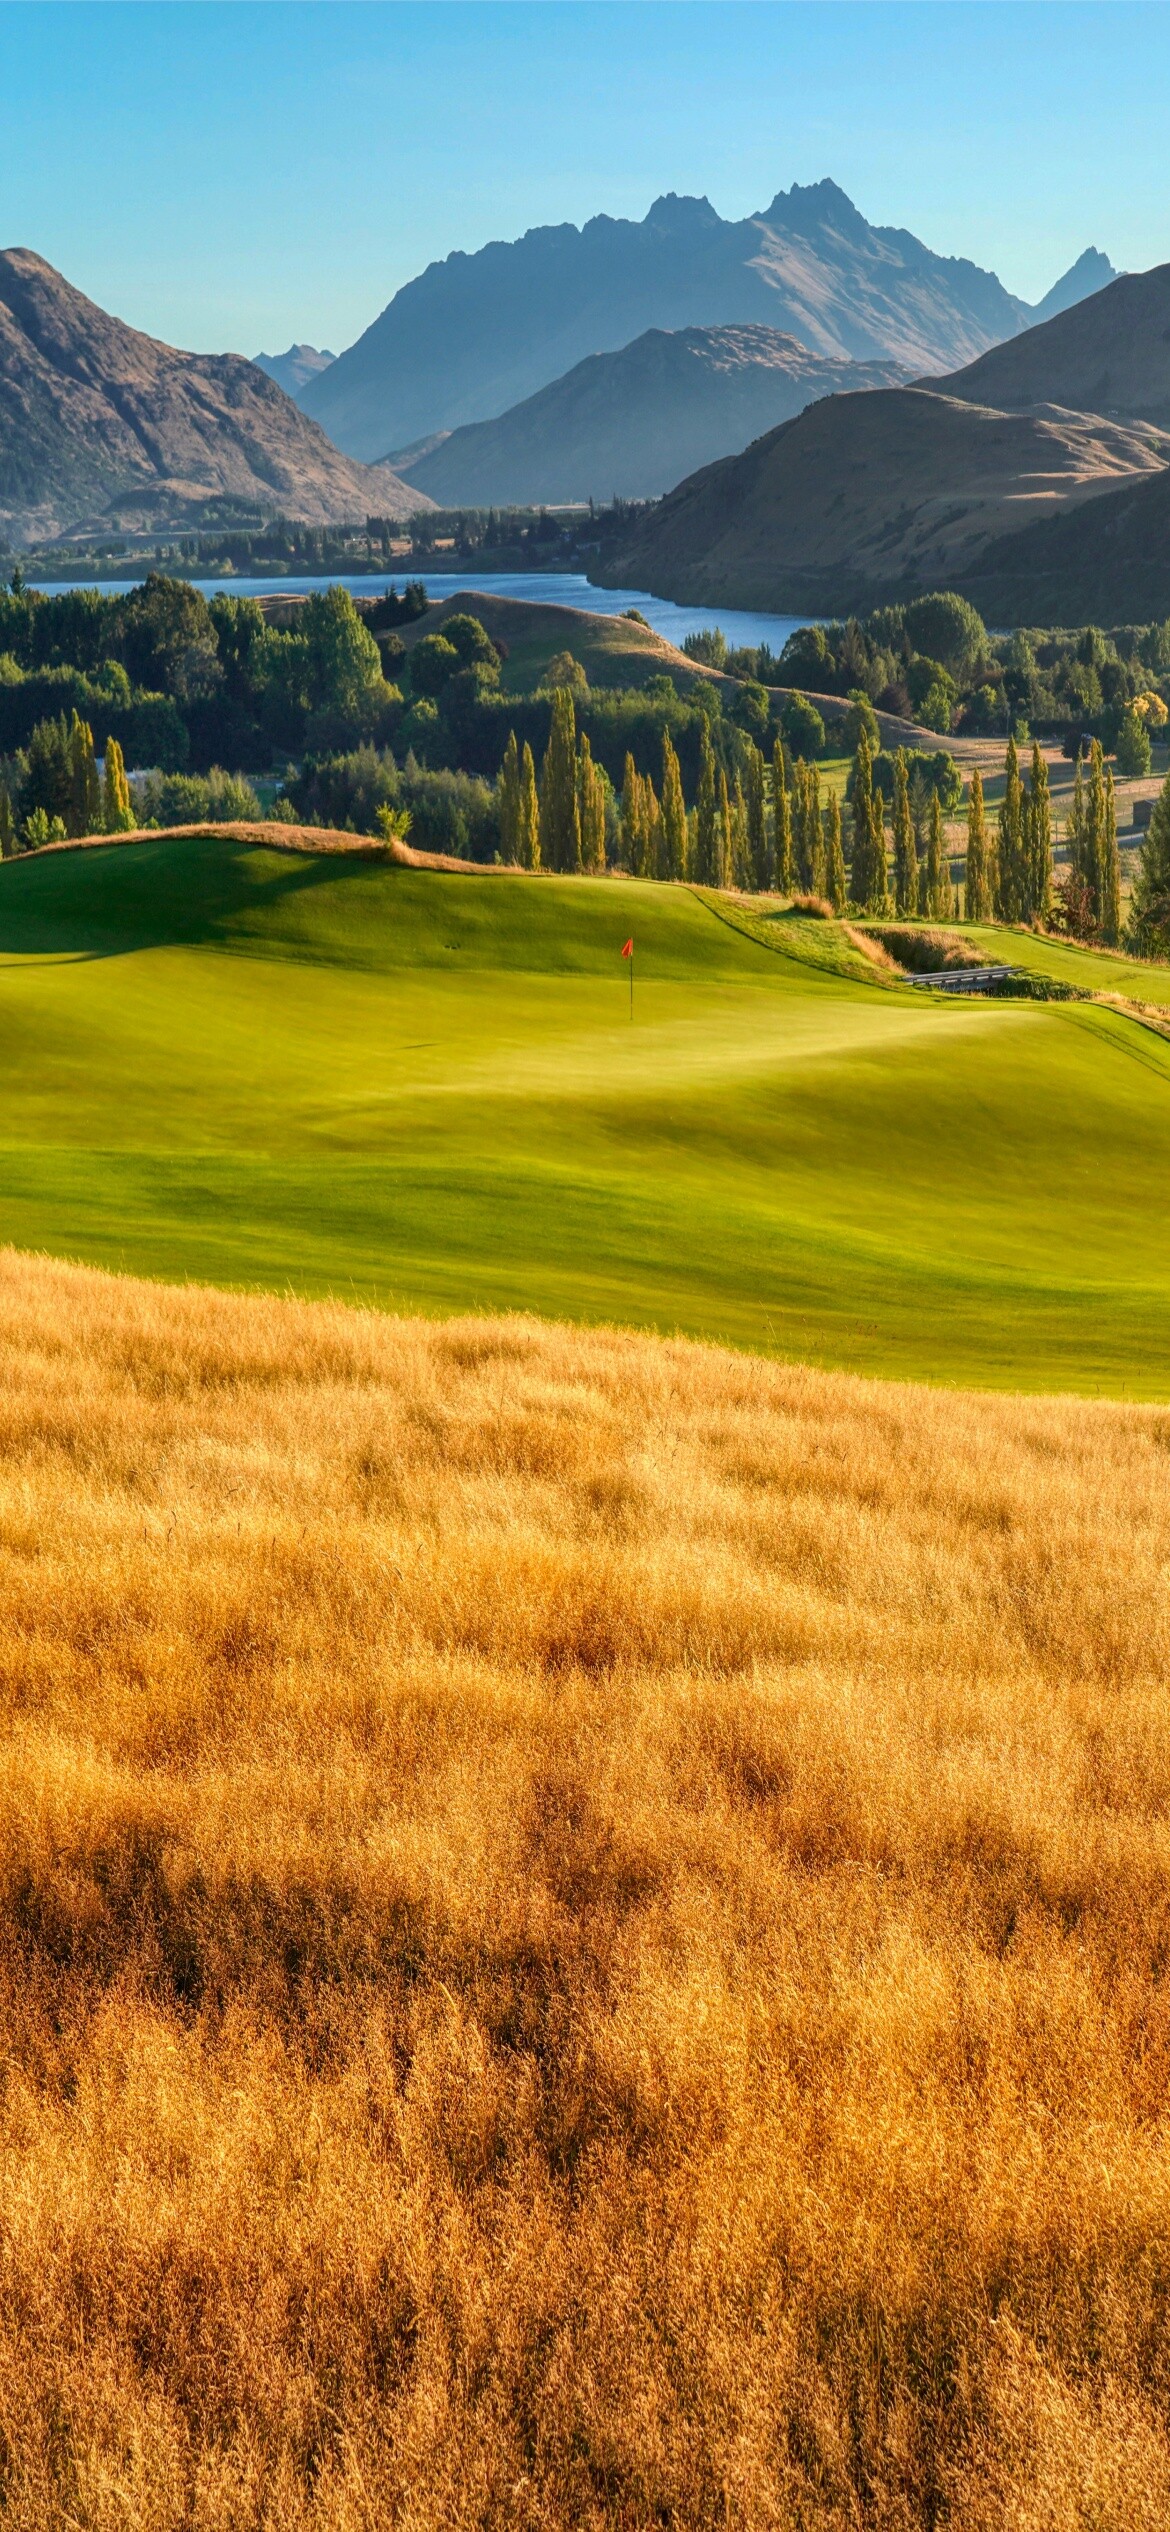 Golf: A grass course that includes a tee box, fairway, and green, Game. 1170x2540 HD Wallpaper.